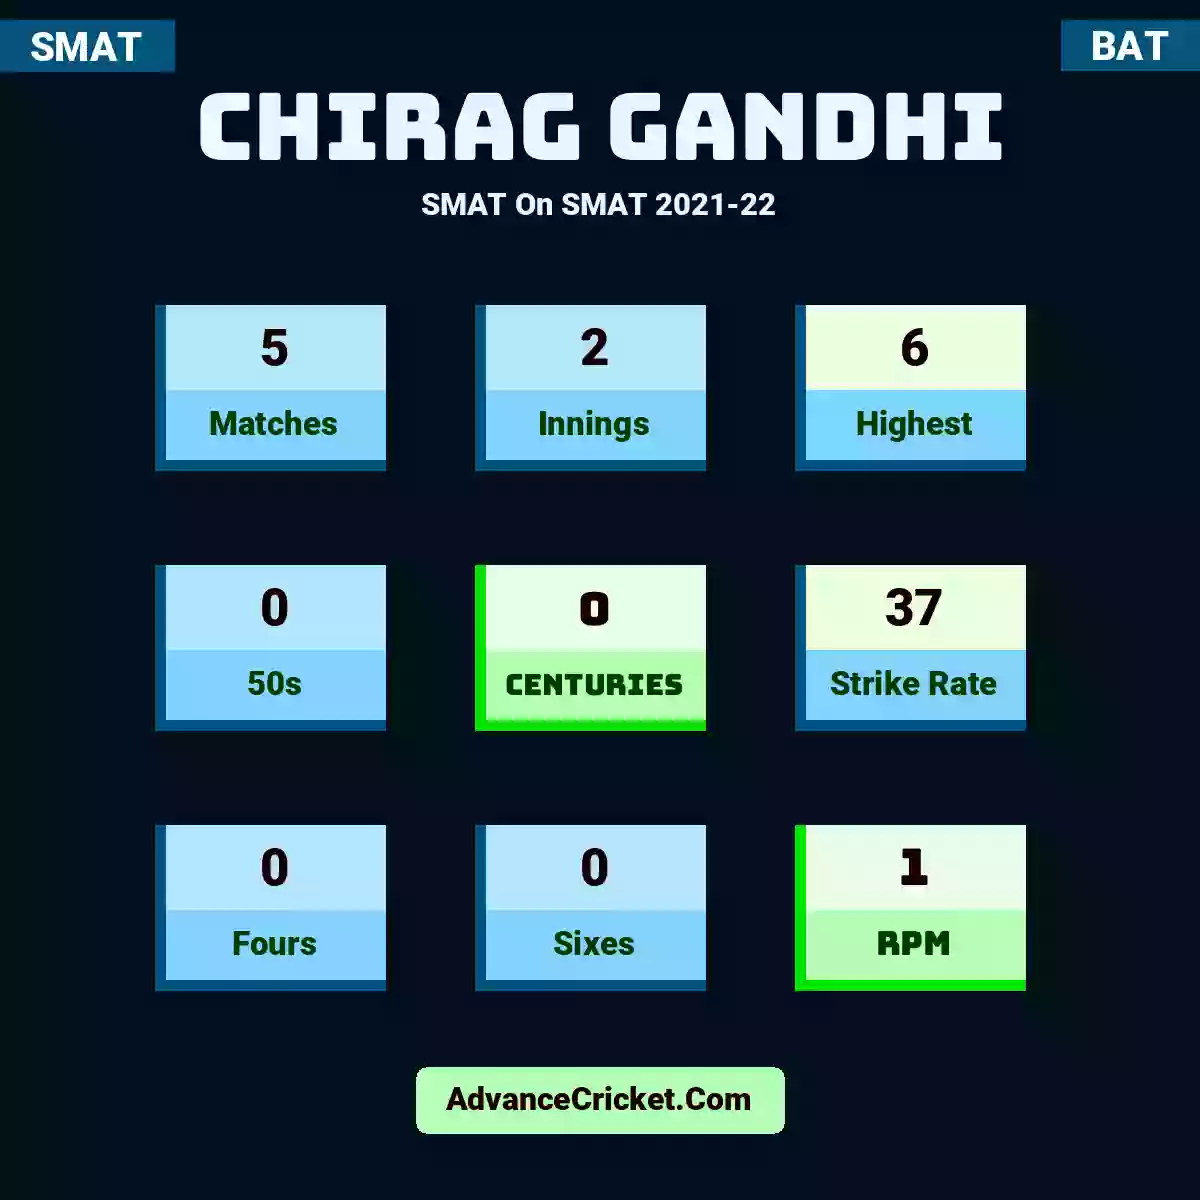 Chirag Gandhi SMAT  On SMAT 2021-22, Chirag Gandhi played 5 matches, scored 6 runs as highest, 0 half-centuries, and 0 centuries, with a strike rate of 37. C.Gandhi hit 0 fours and 0 sixes, with an RPM of 1.